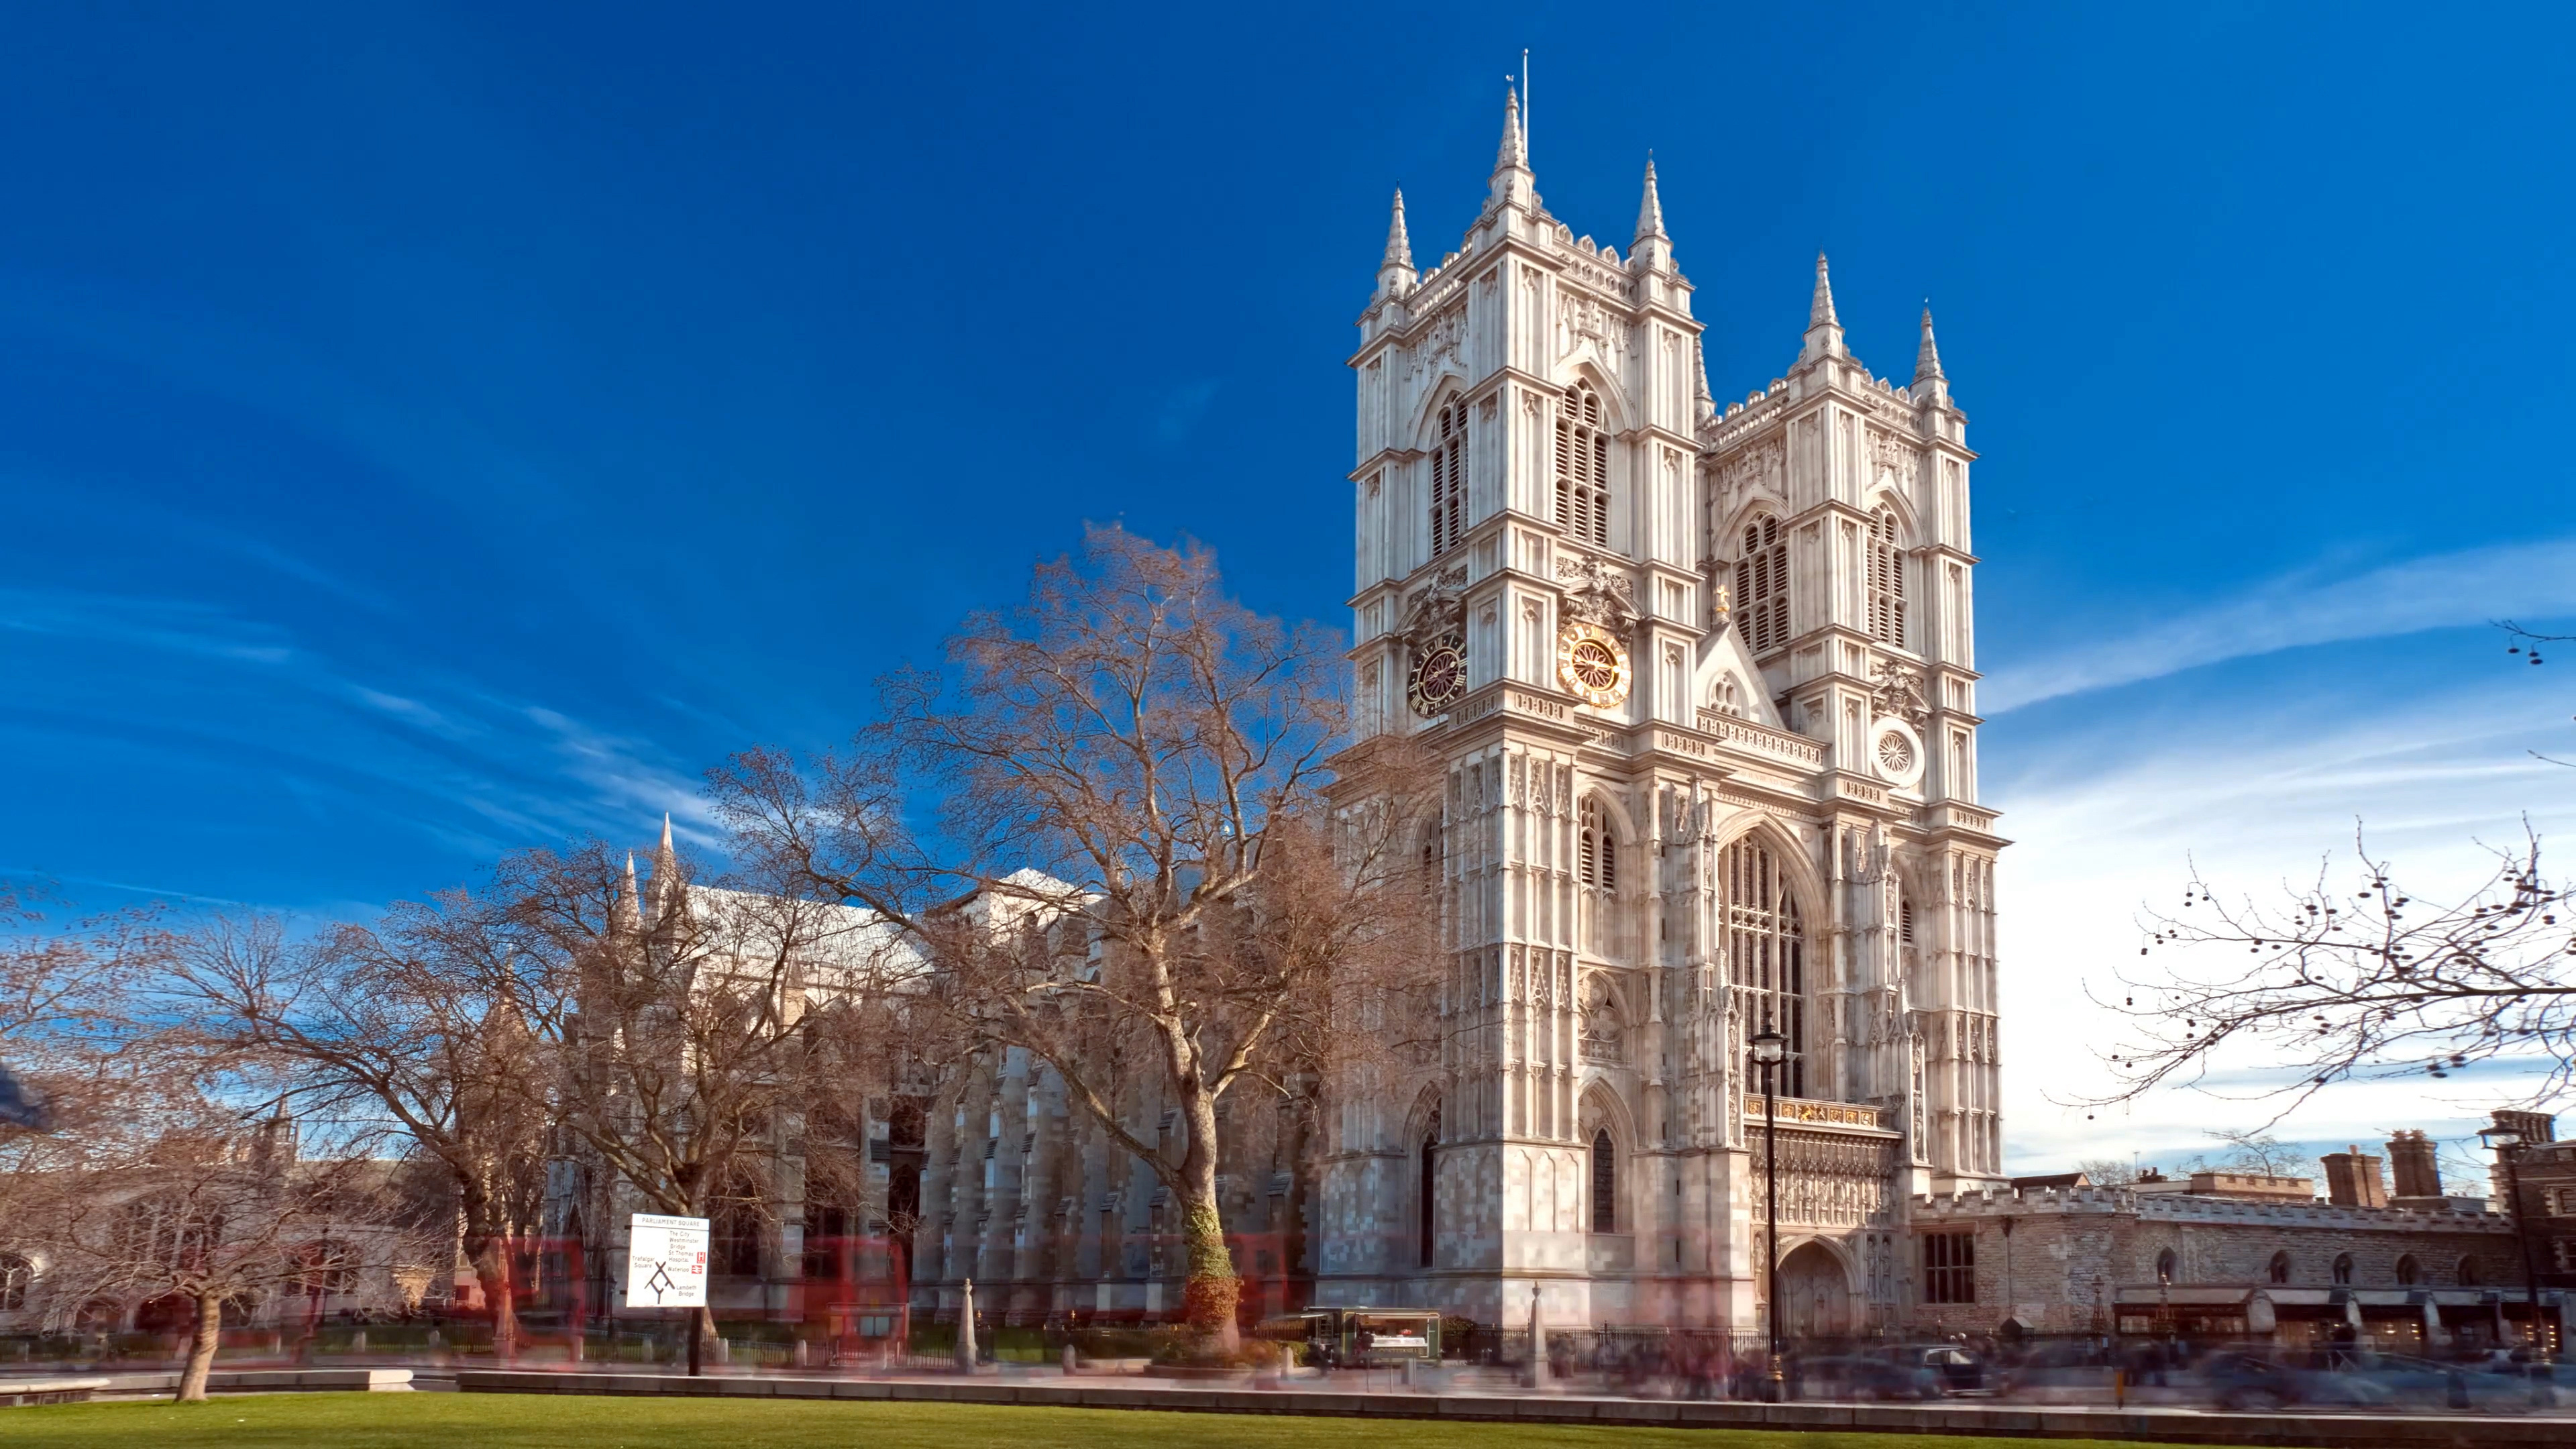 Westminster Abbey, Top attractions, Historical site, British heritage, 3840x2160 4K Desktop